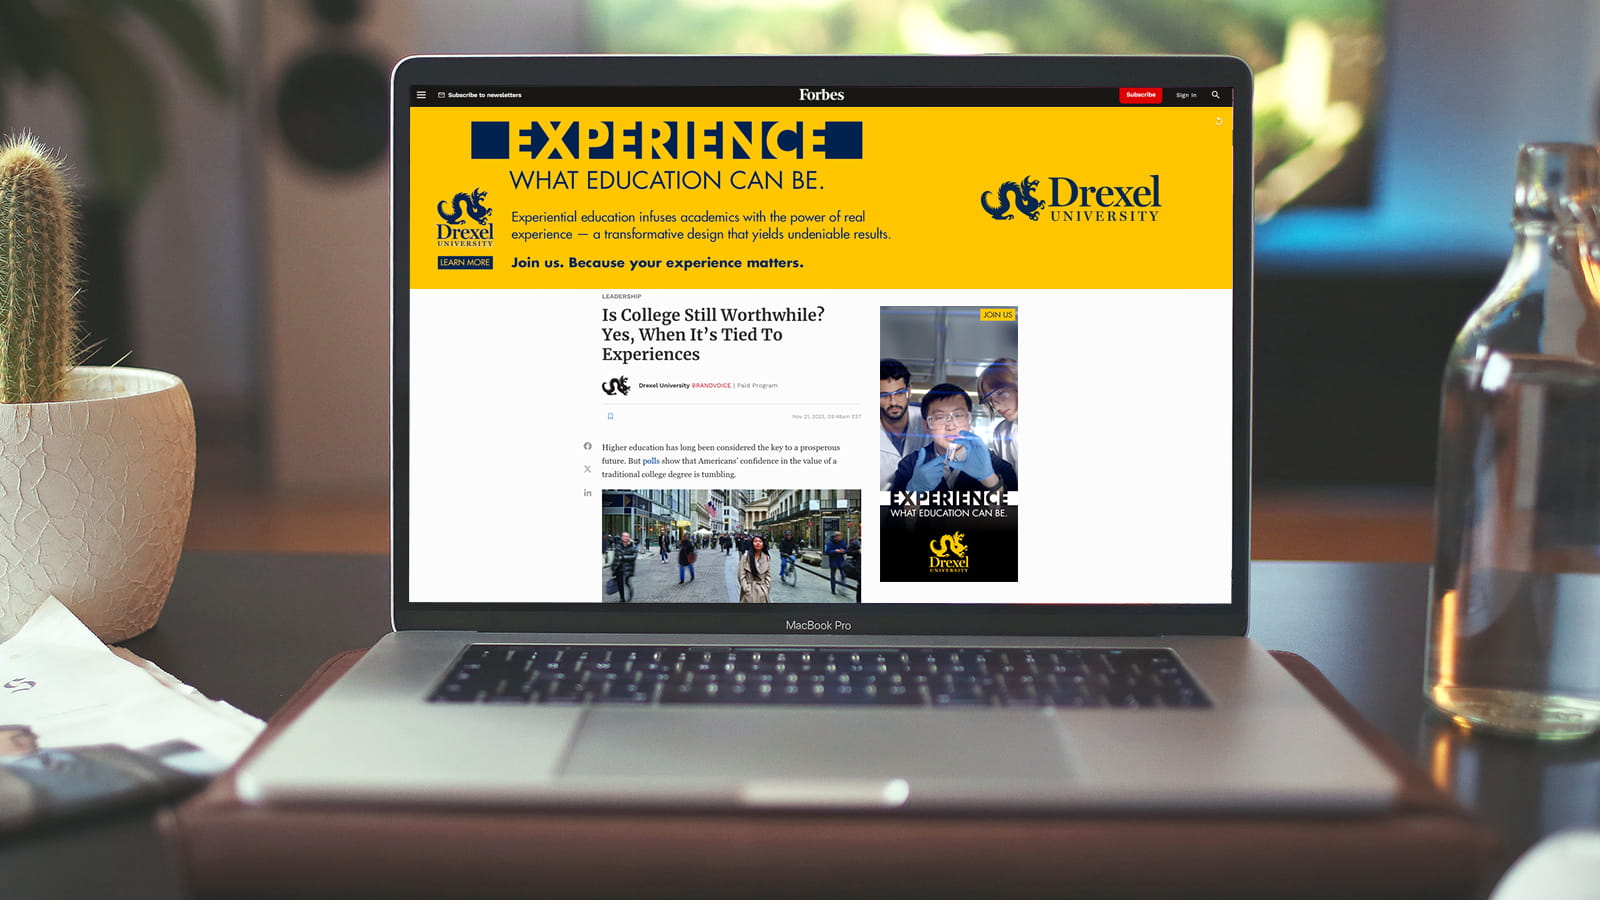 Experience Drexel web banner and video ad